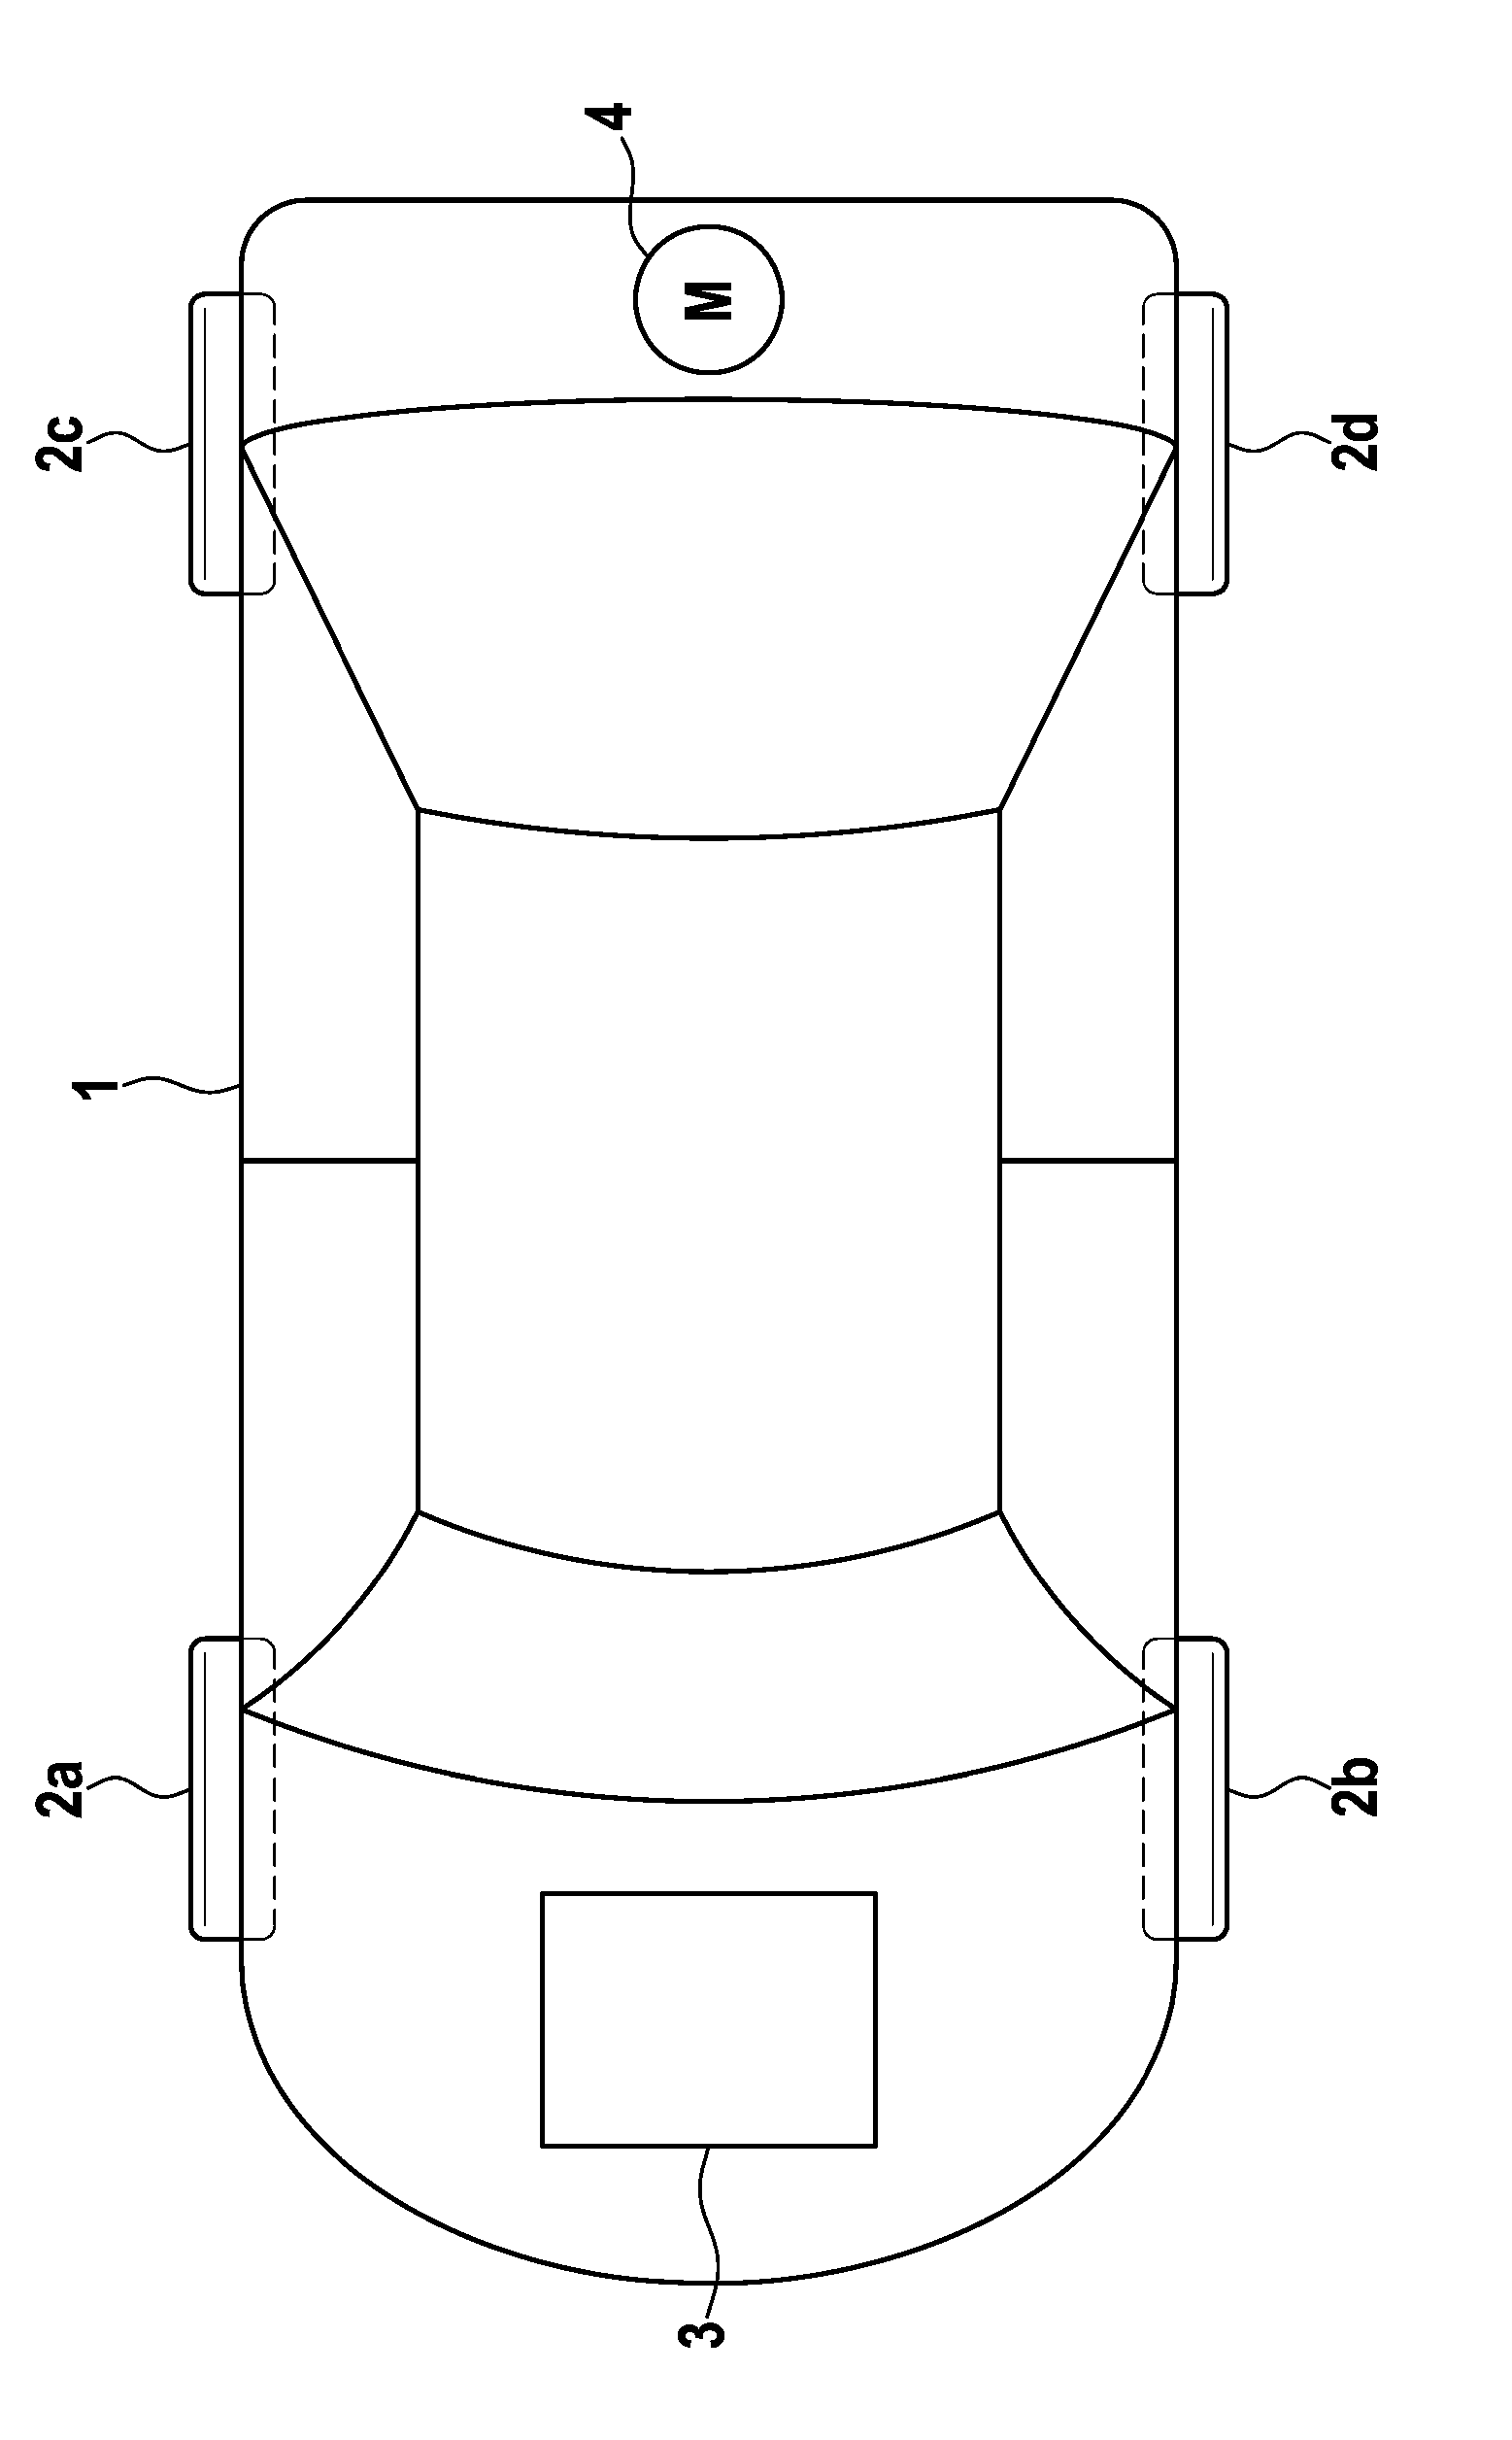 Method for reducing the drive slip in vehicles with multiple engines